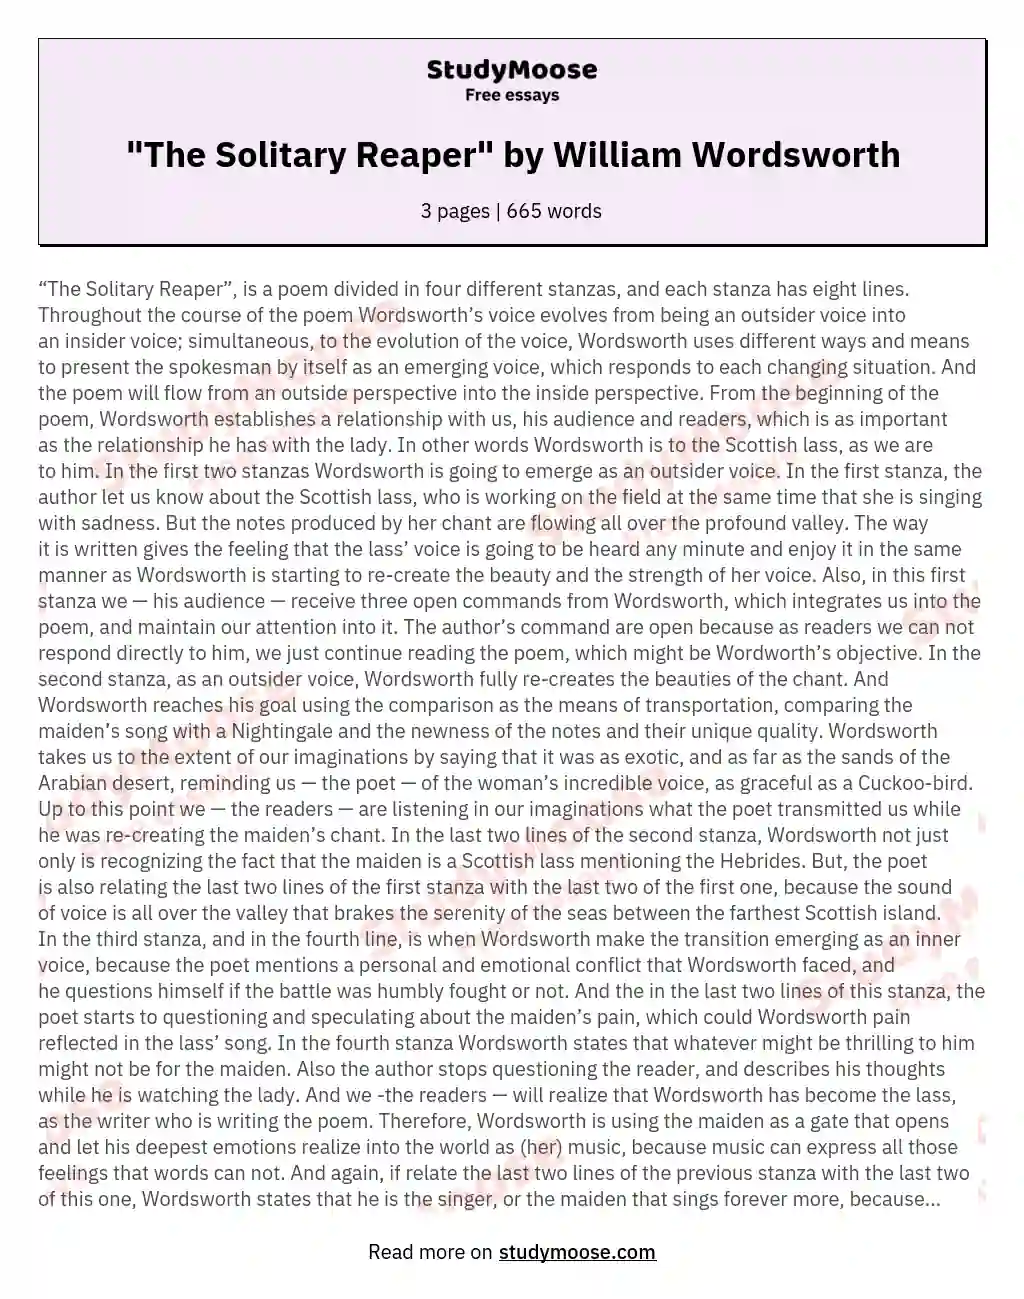 "The Solitary Reaper" by William Wordsworth essay